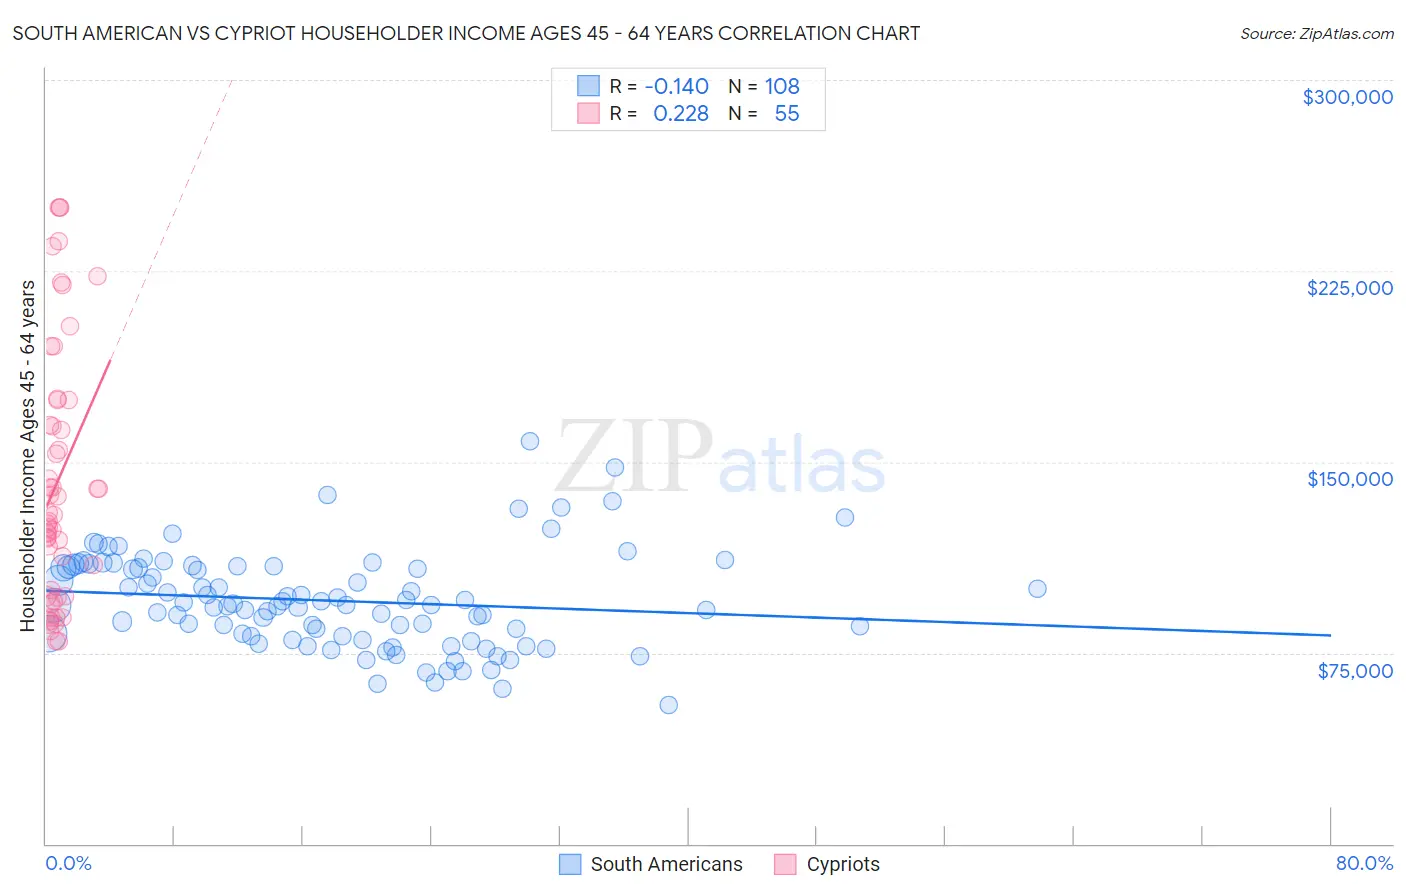 South American vs Cypriot Householder Income Ages 45 - 64 years